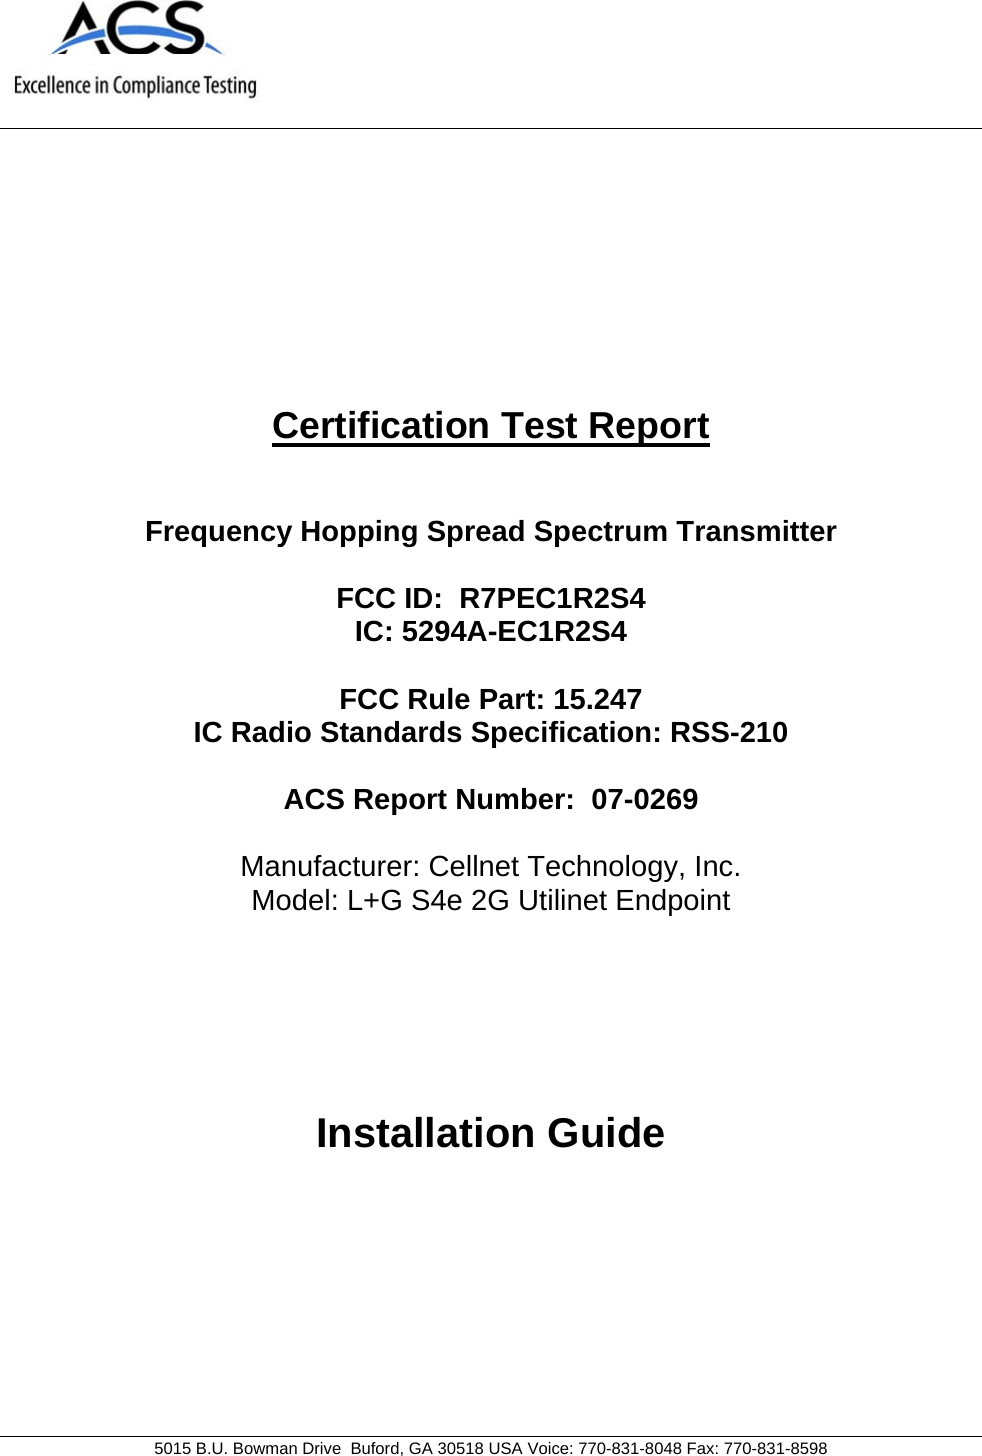   5015 B.U. Bowman Drive  Buford, GA 30518 USA Voice: 770-831-8048 Fax: 770-831-8598   Certification Test Report   Frequency Hopping Spread Spectrum Transmitter  FCC ID:  R7PEC1R2S4 IC: 5294A-EC1R2S4  FCC Rule Part: 15.247 IC Radio Standards Specification: RSS-210  ACS Report Number:  07-0269   Manufacturer: Cellnet Technology, Inc. Model: L+G S4e 2G Utilinet Endpoint      Installation Guide 